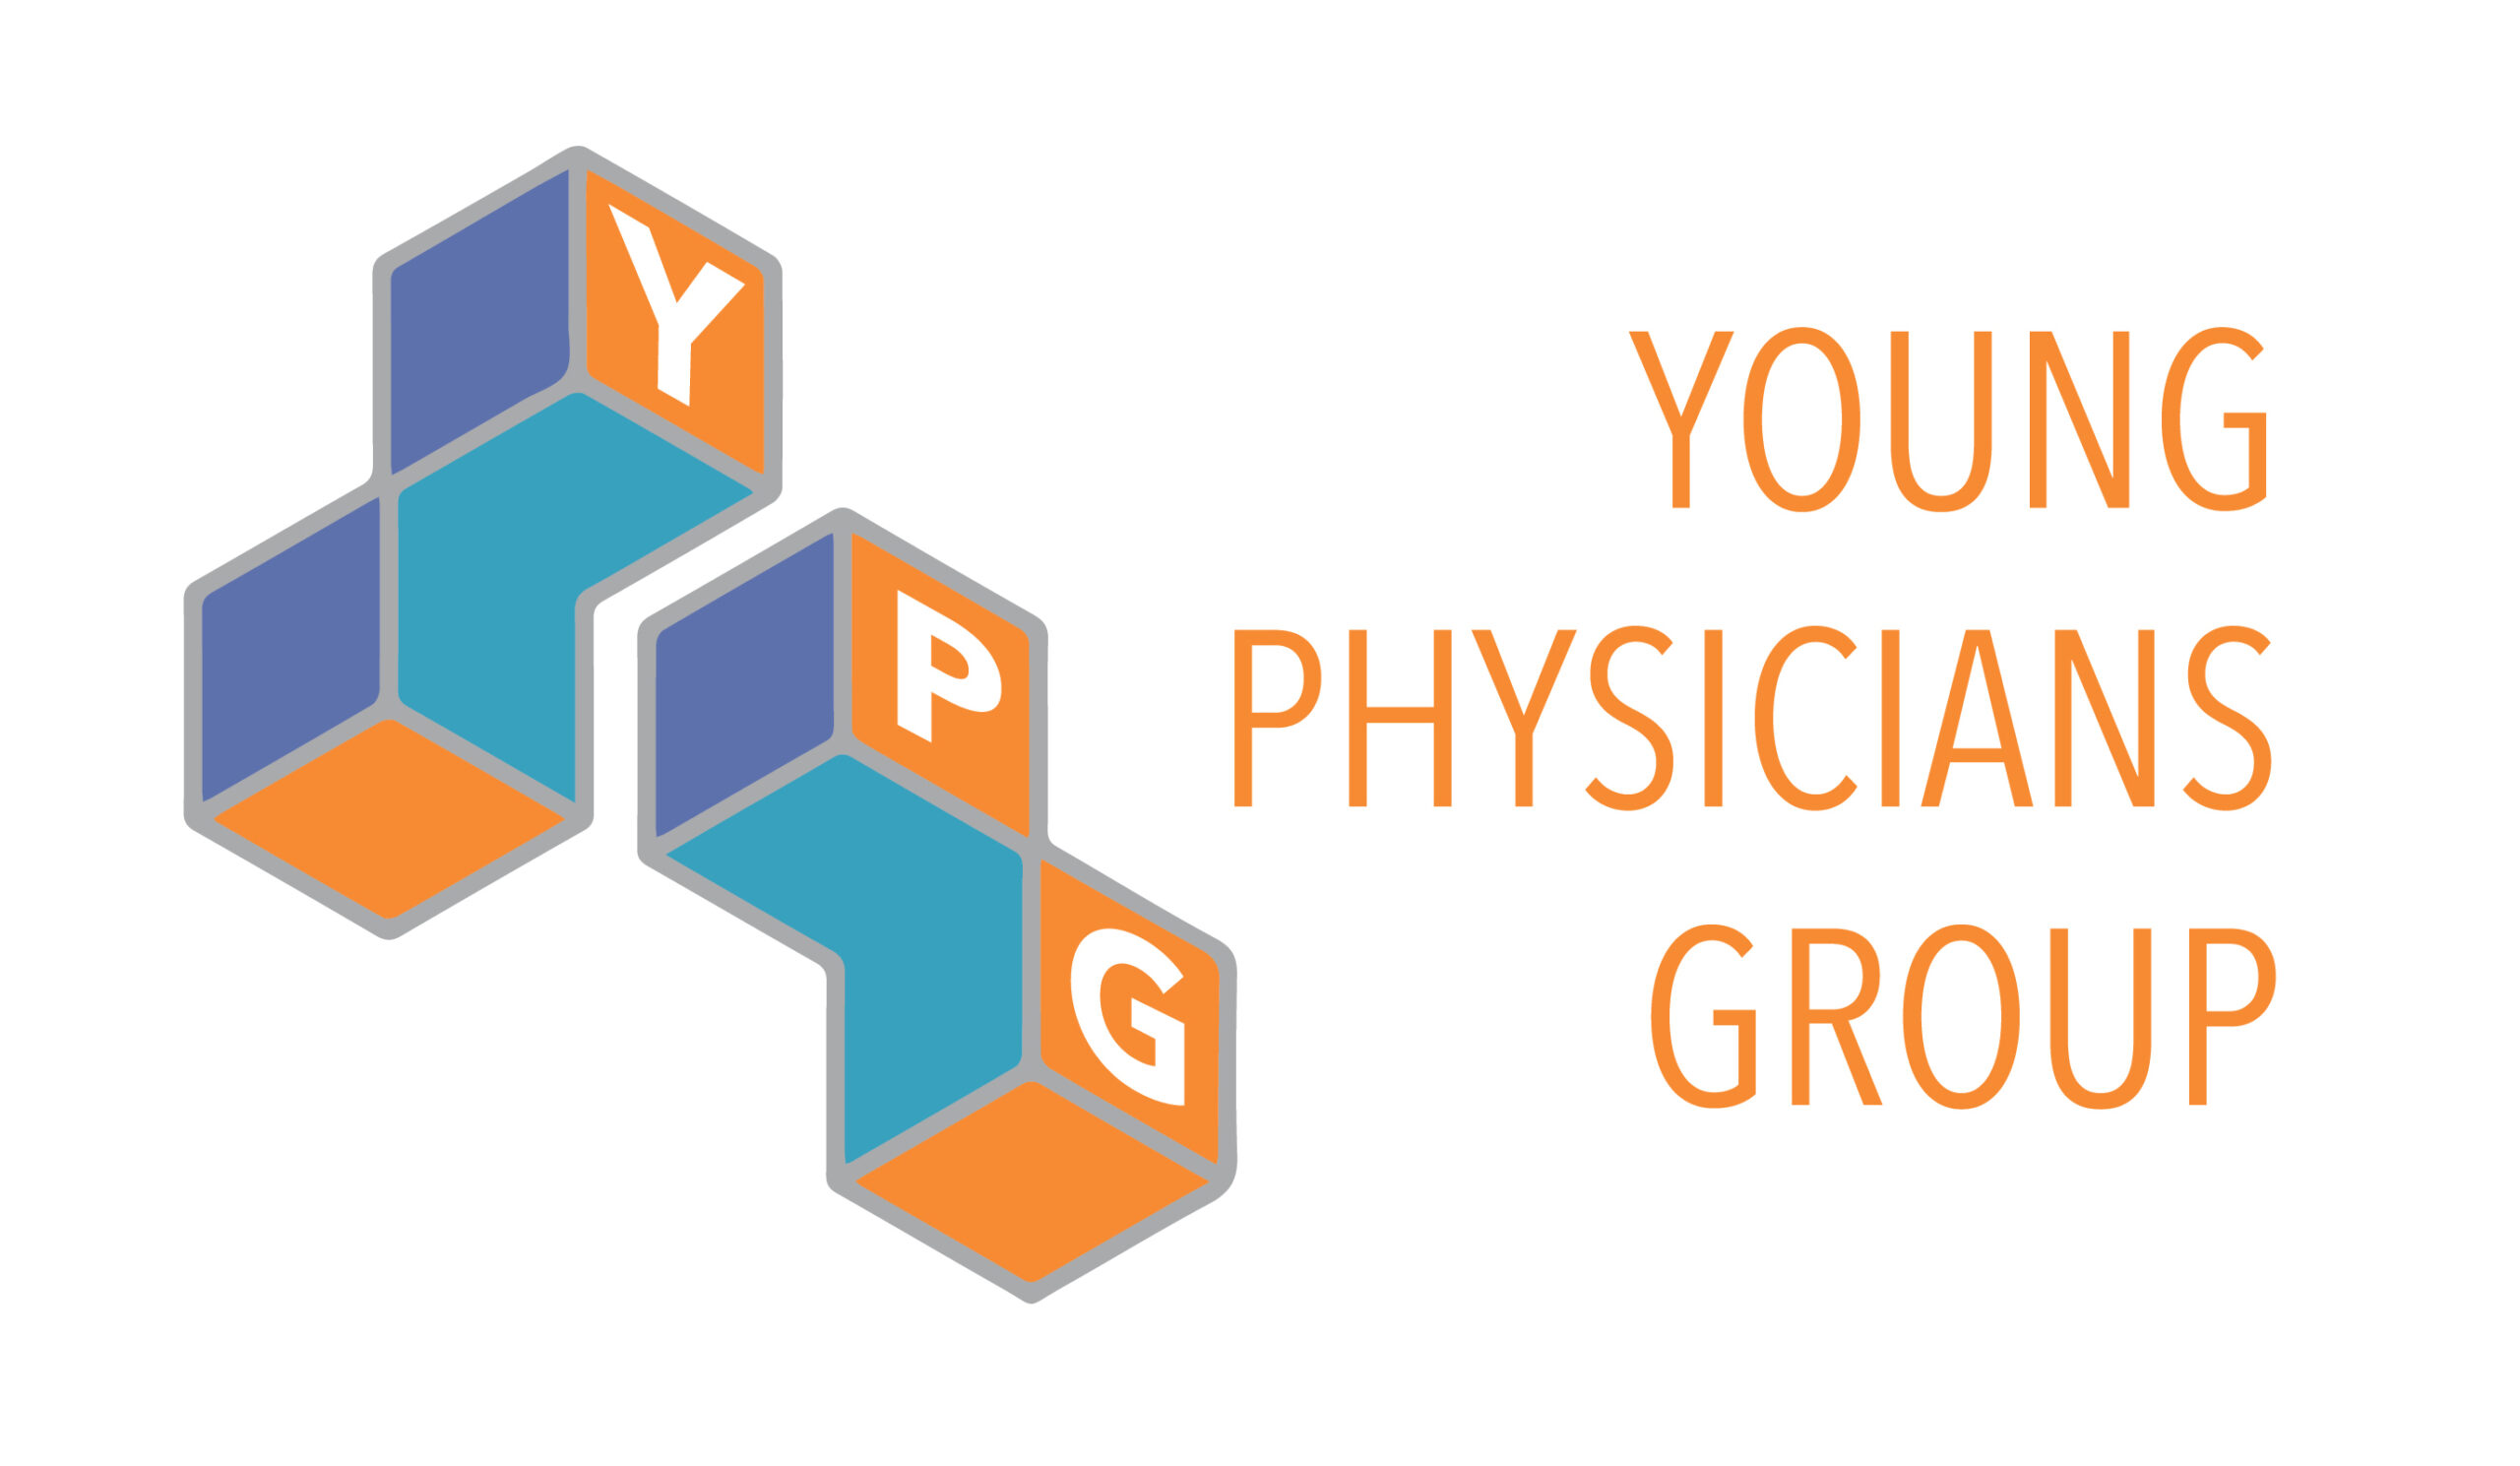 Young physicians group logo